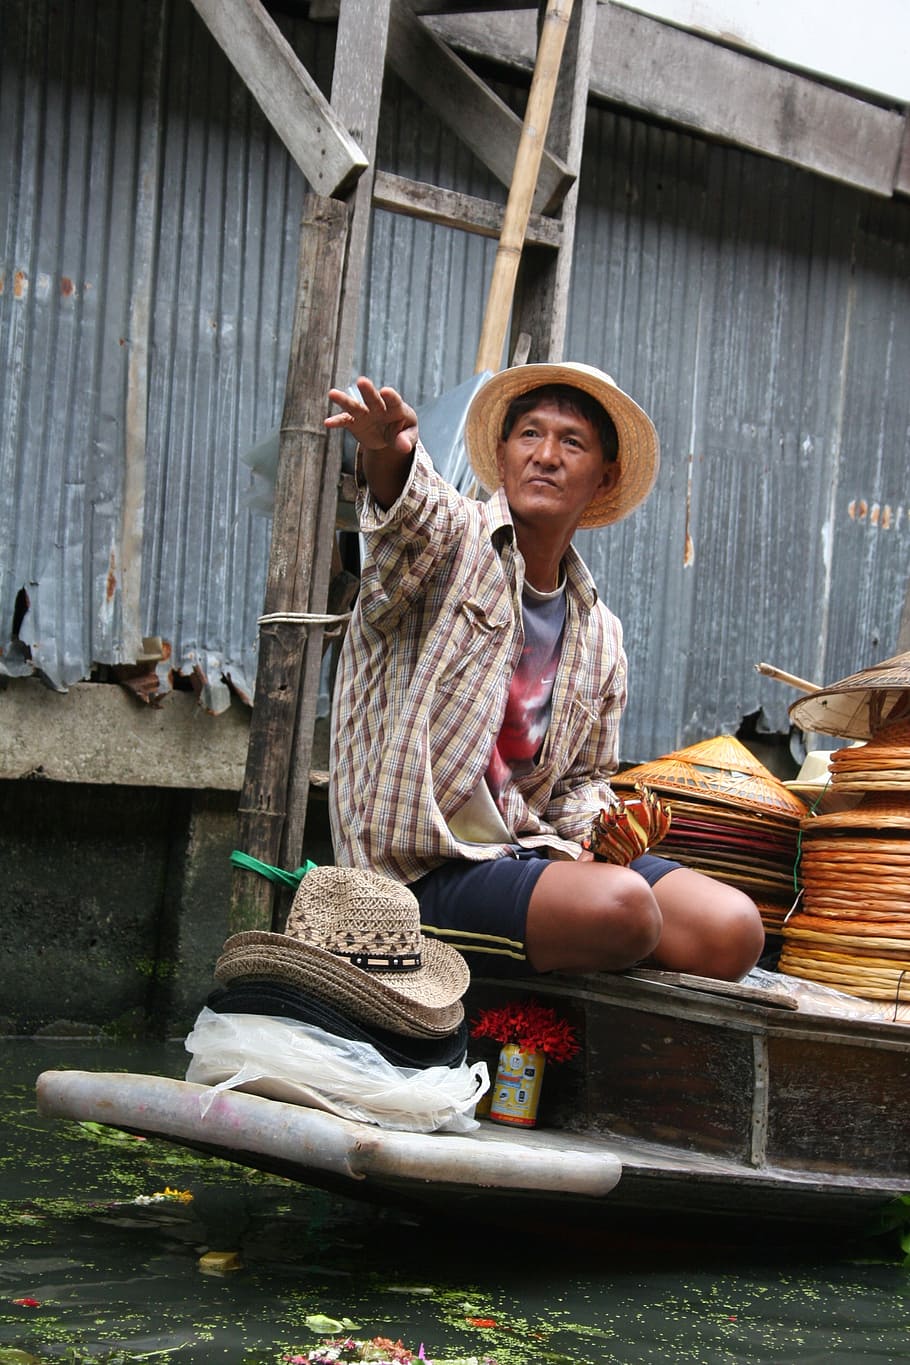 floating market, thailand, asia, thai, man, selling, hats, hat, one person, clothing